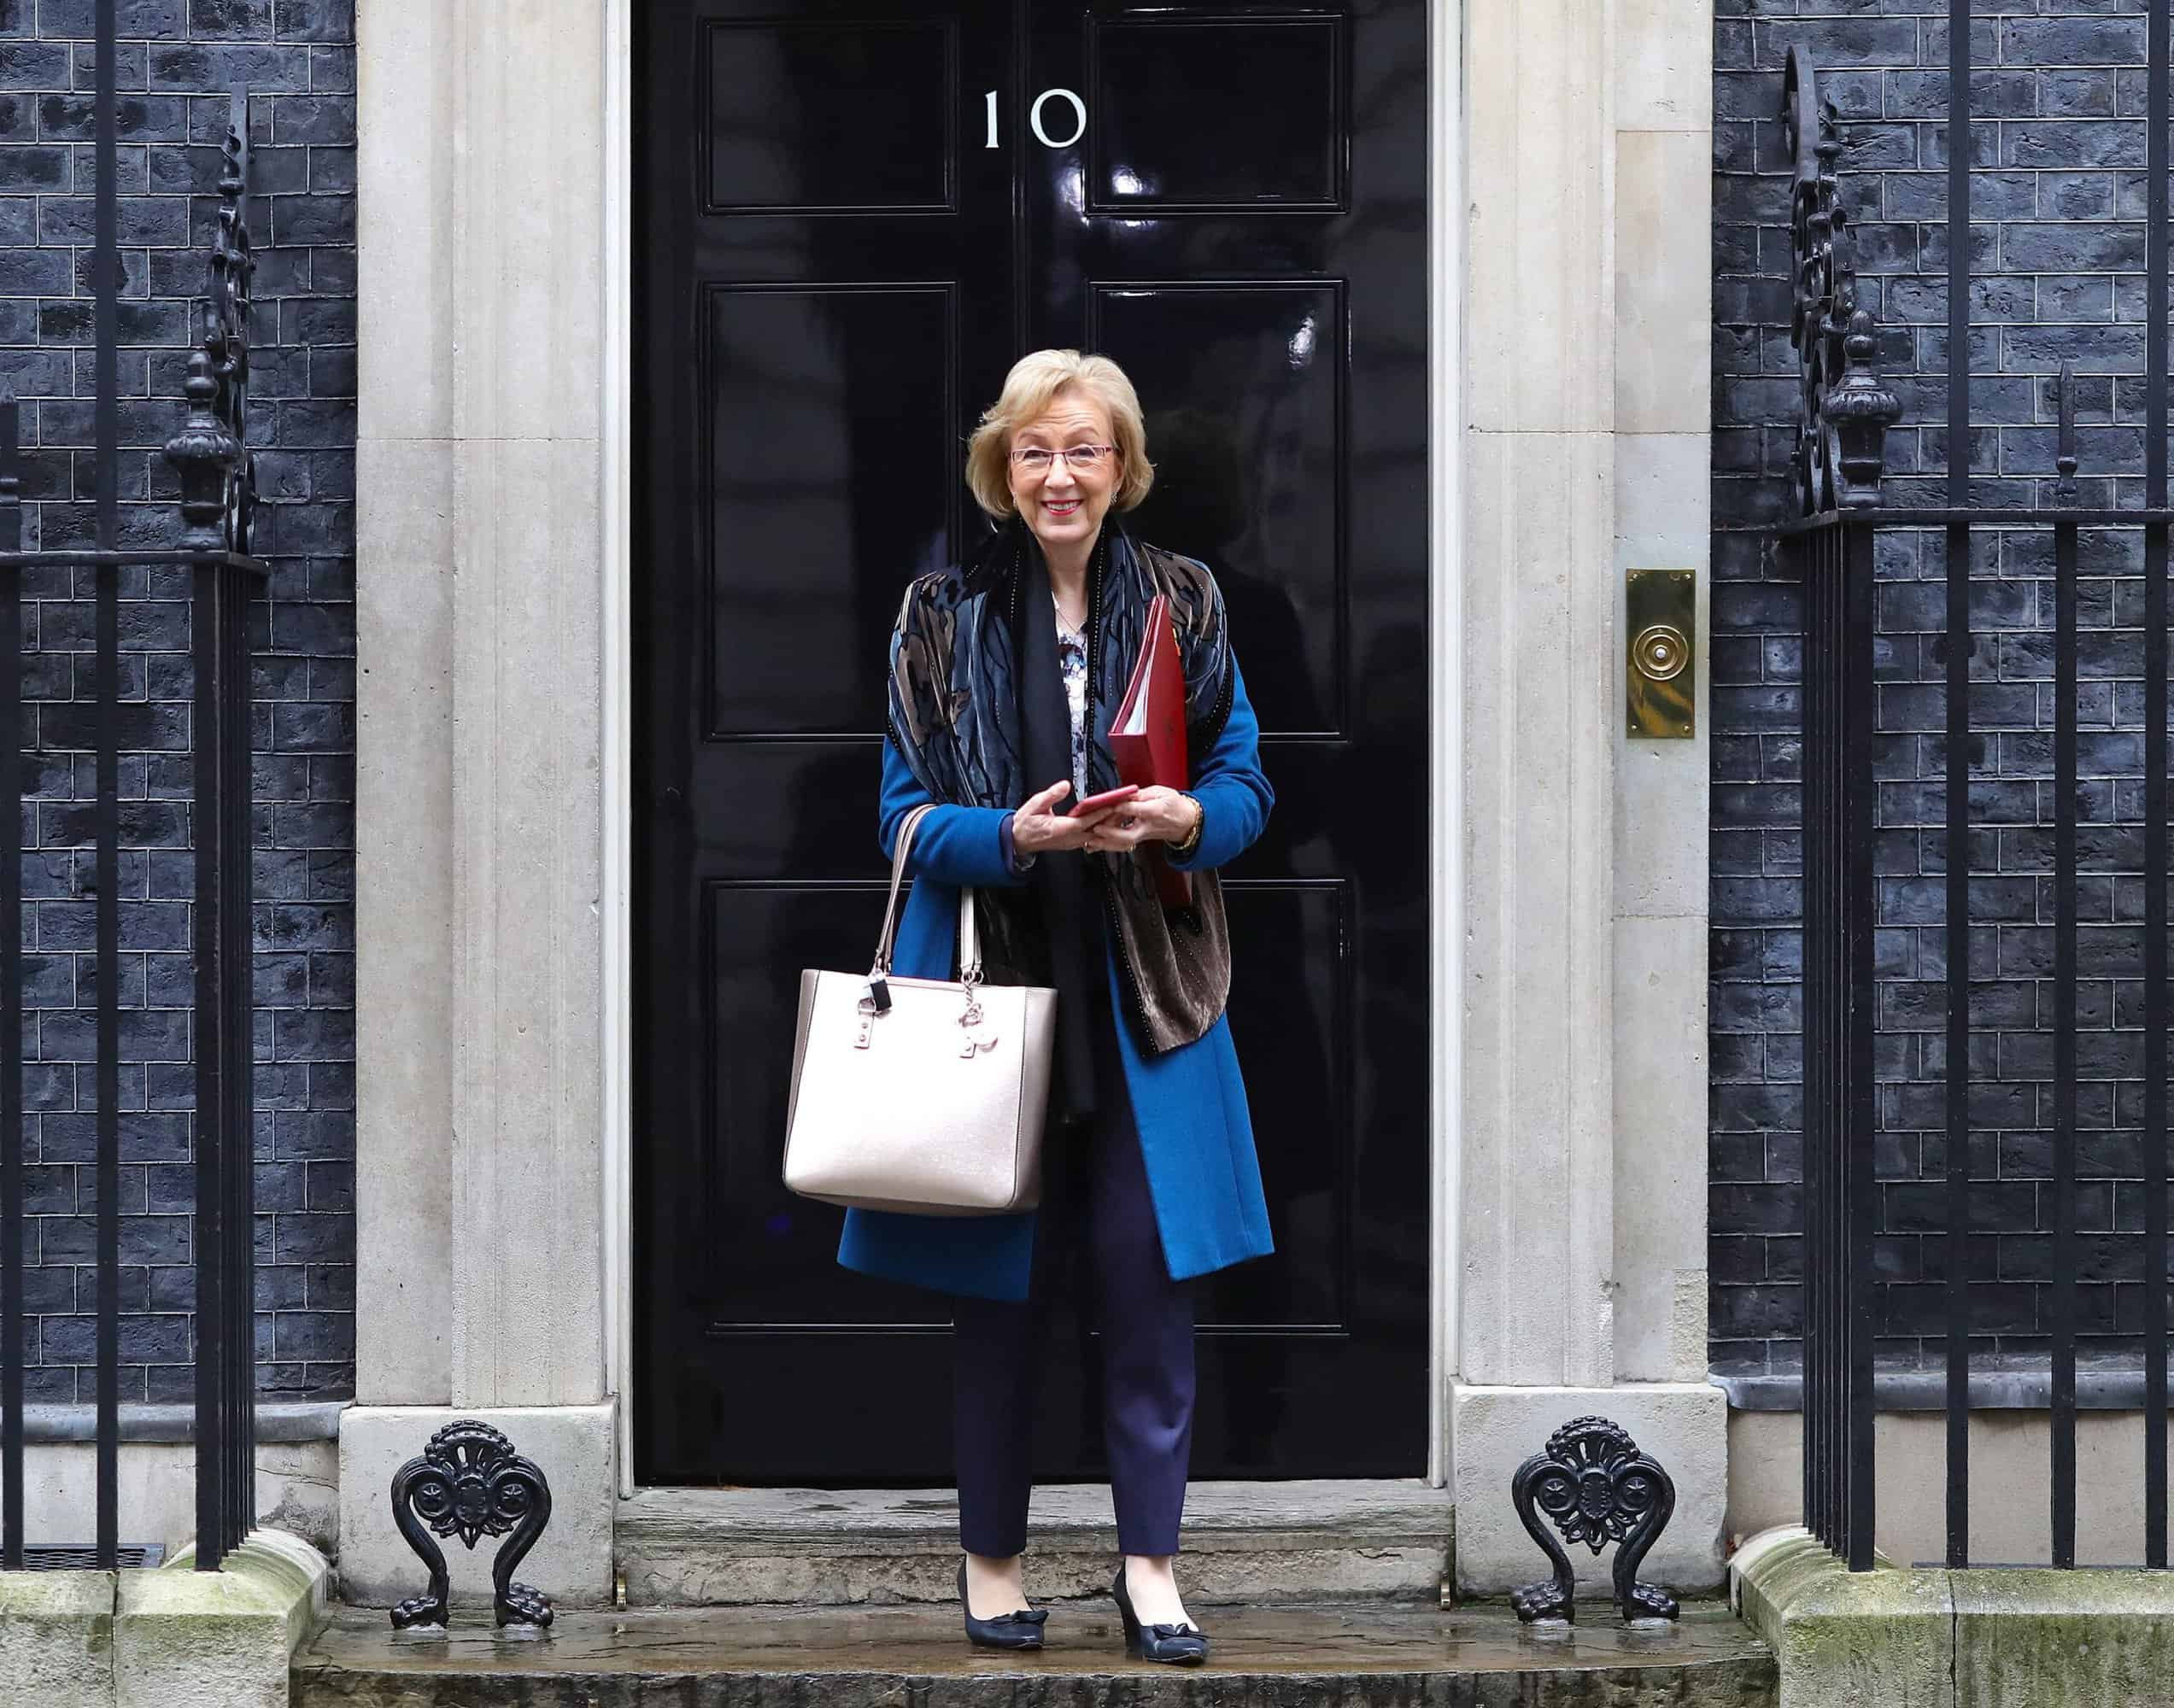 Andrea Leadsom lashes out at Johnson’s ‘unacceptable leadership’ in letter